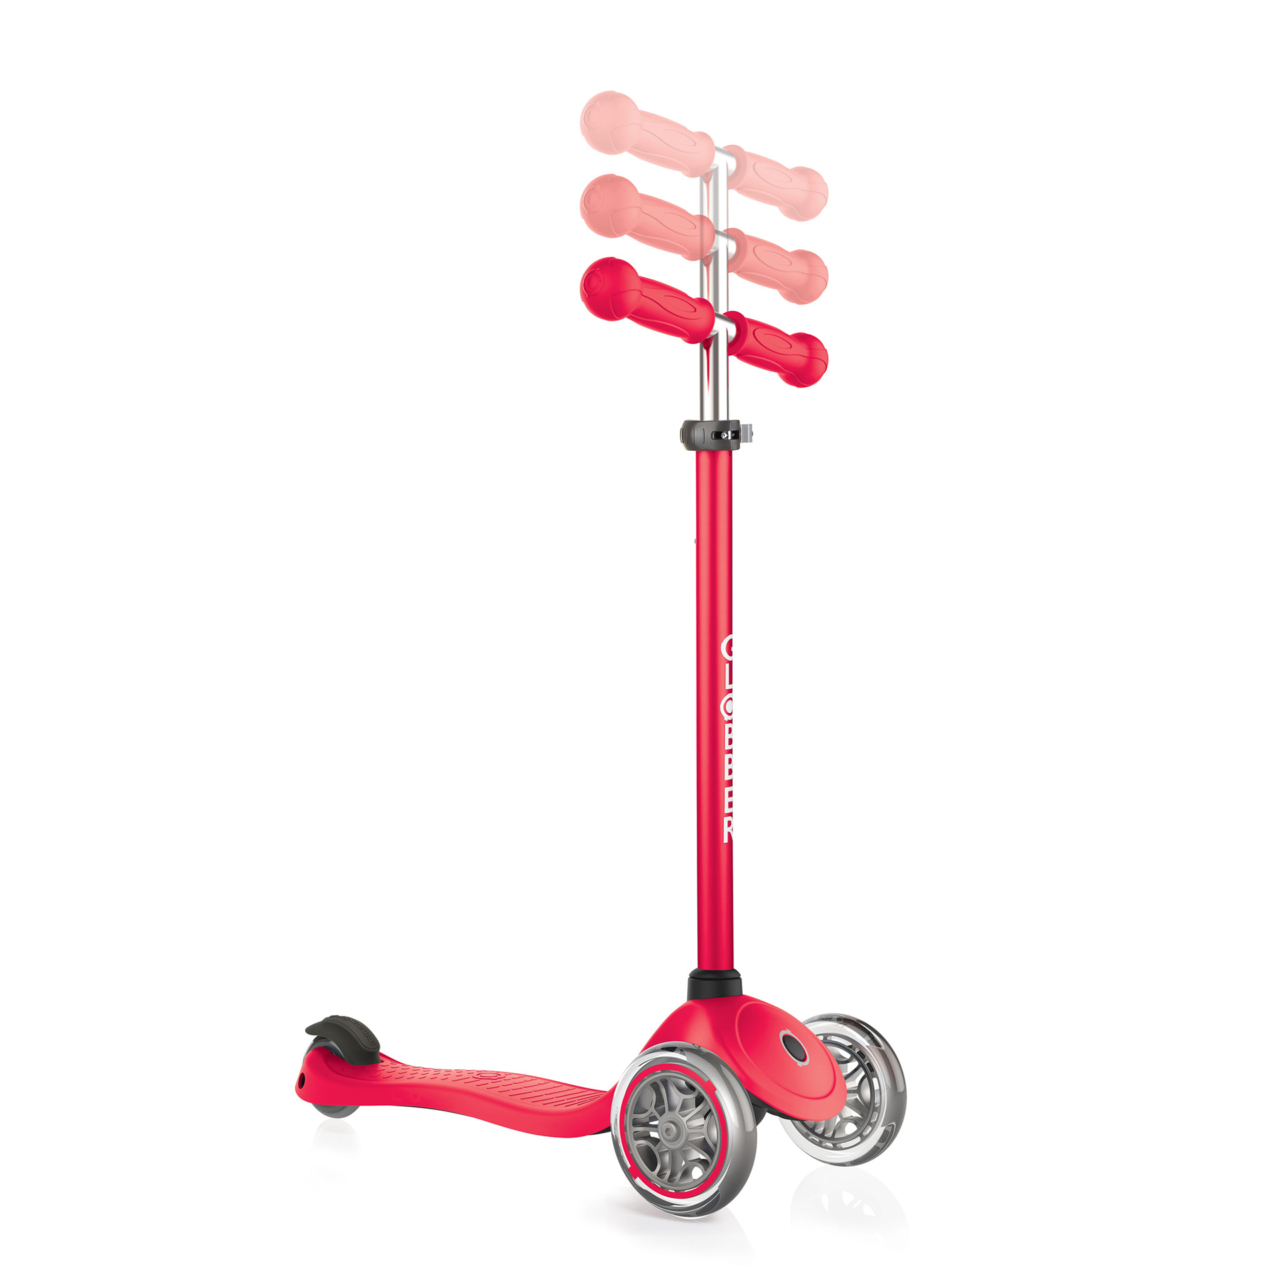 422 102 3 Adjustable Scooter For 3 Year Olds